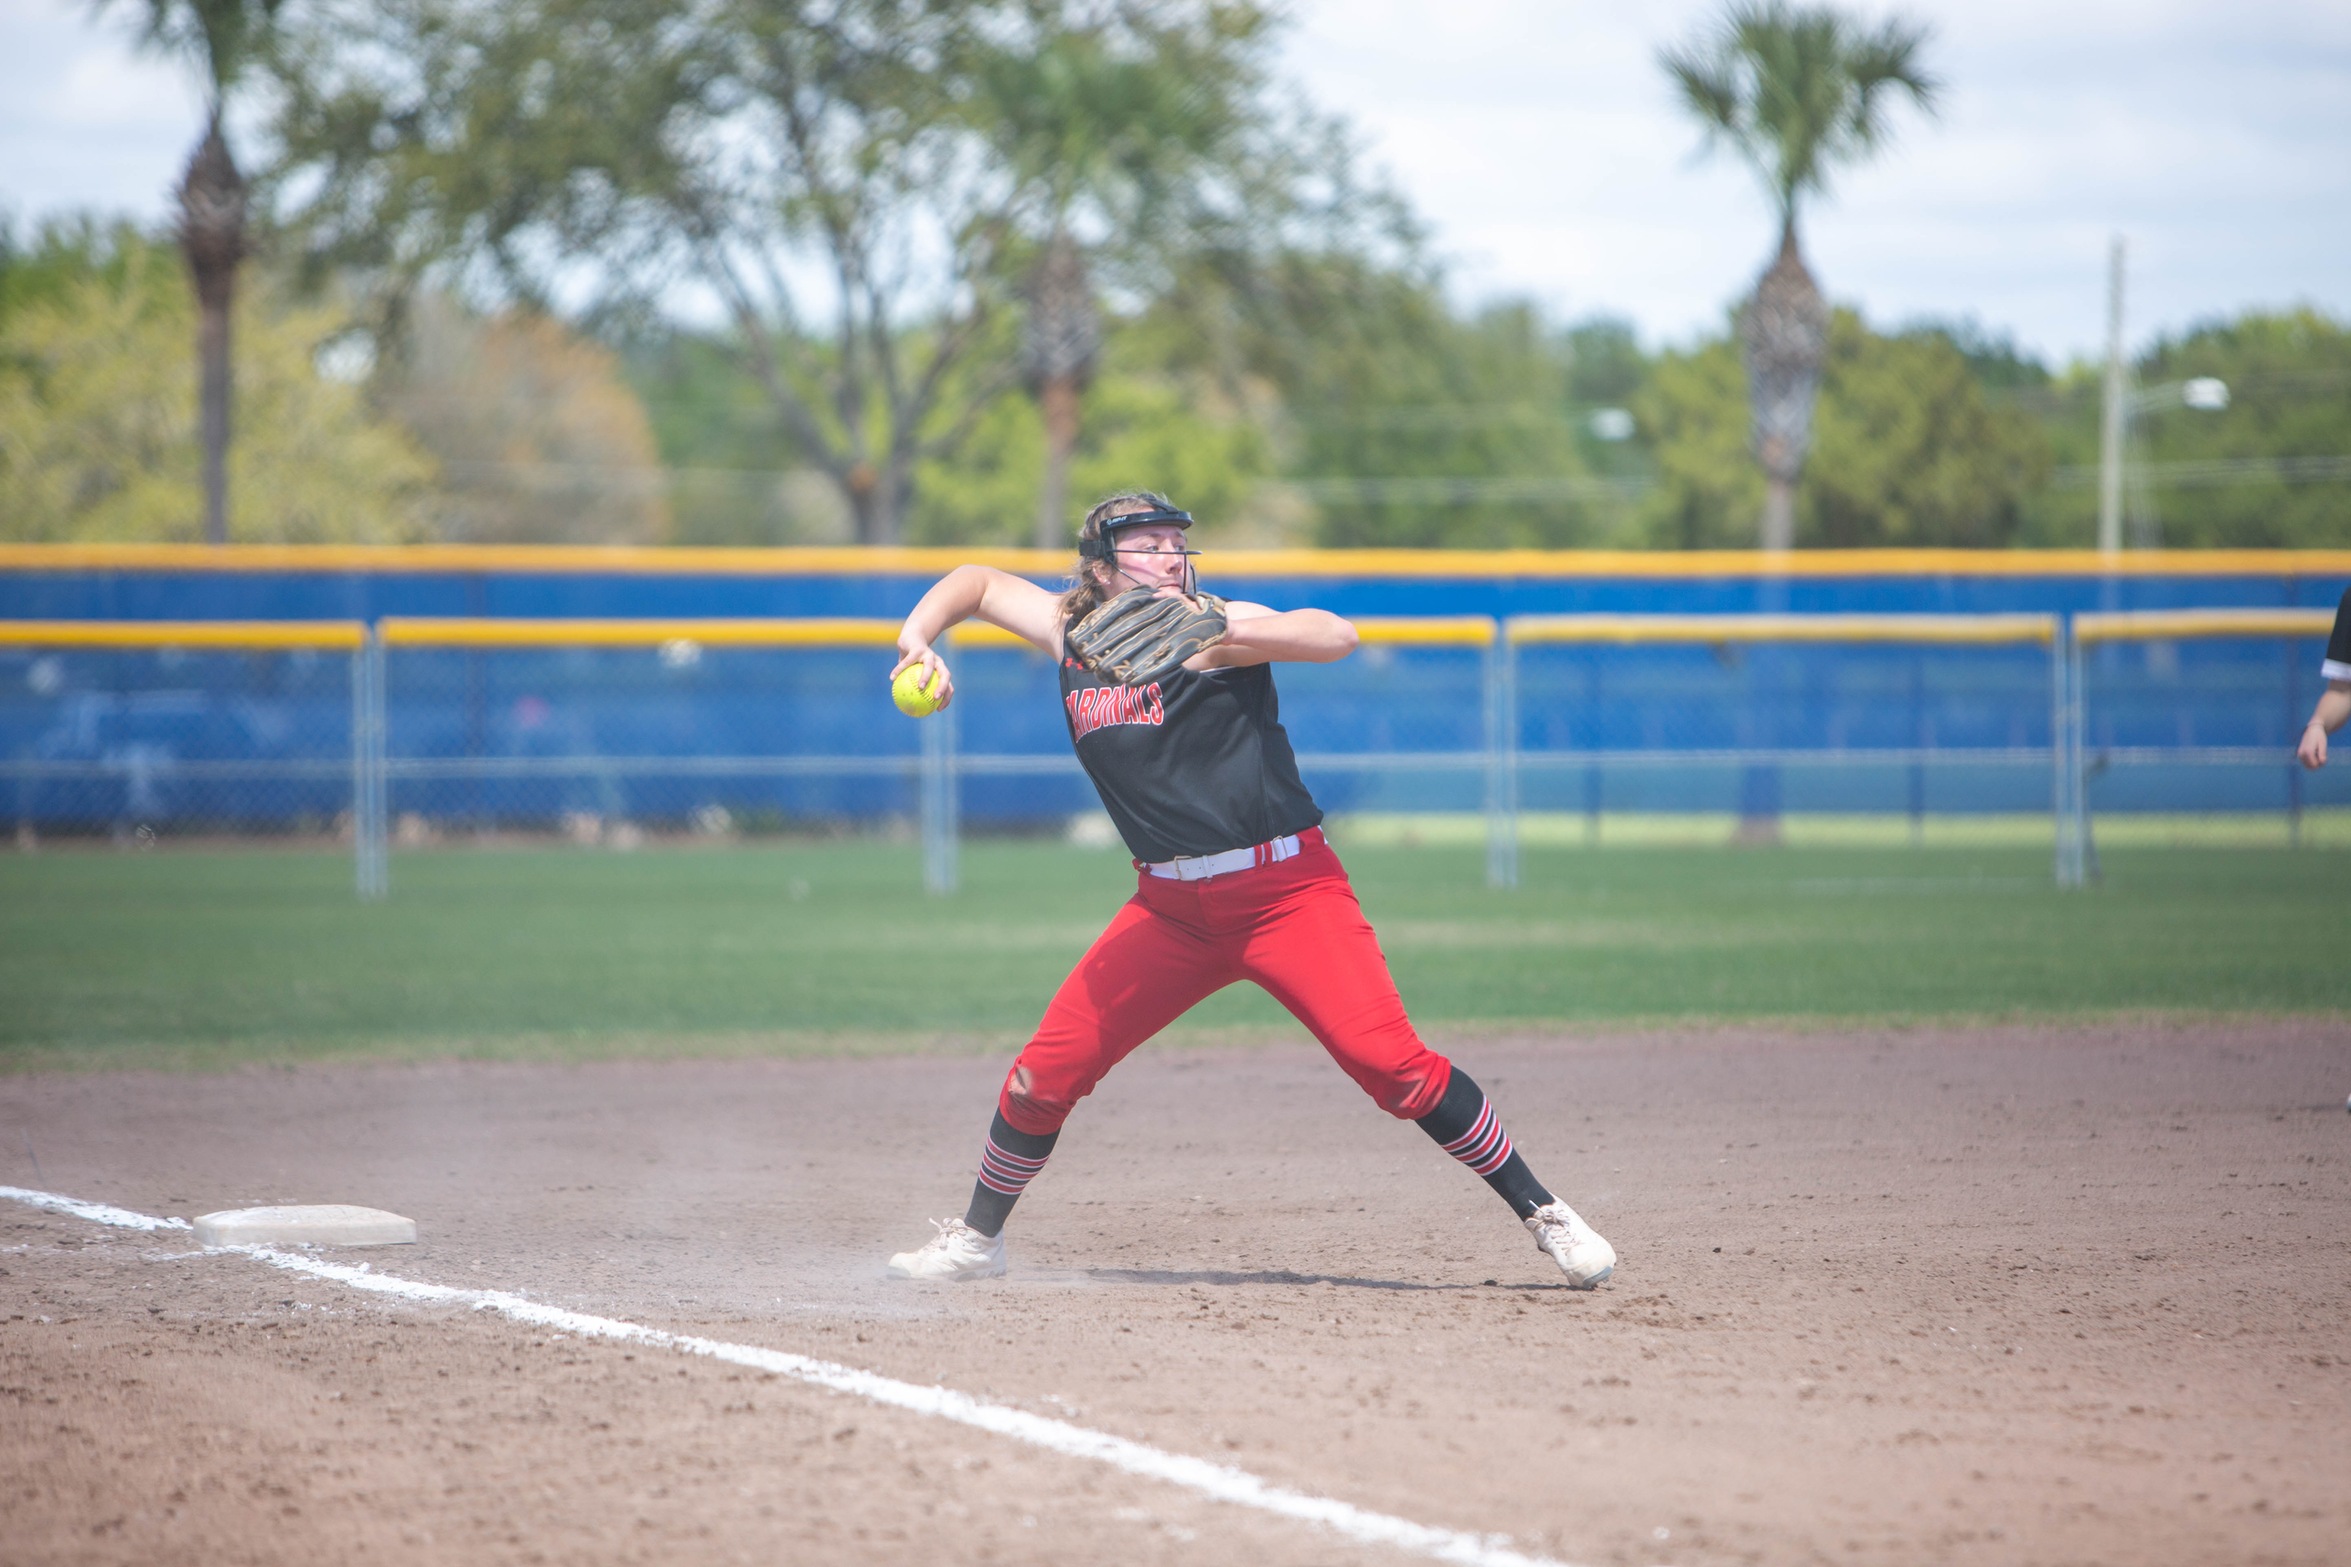 Cardinals pick up two of three games against Trojans and Spartans